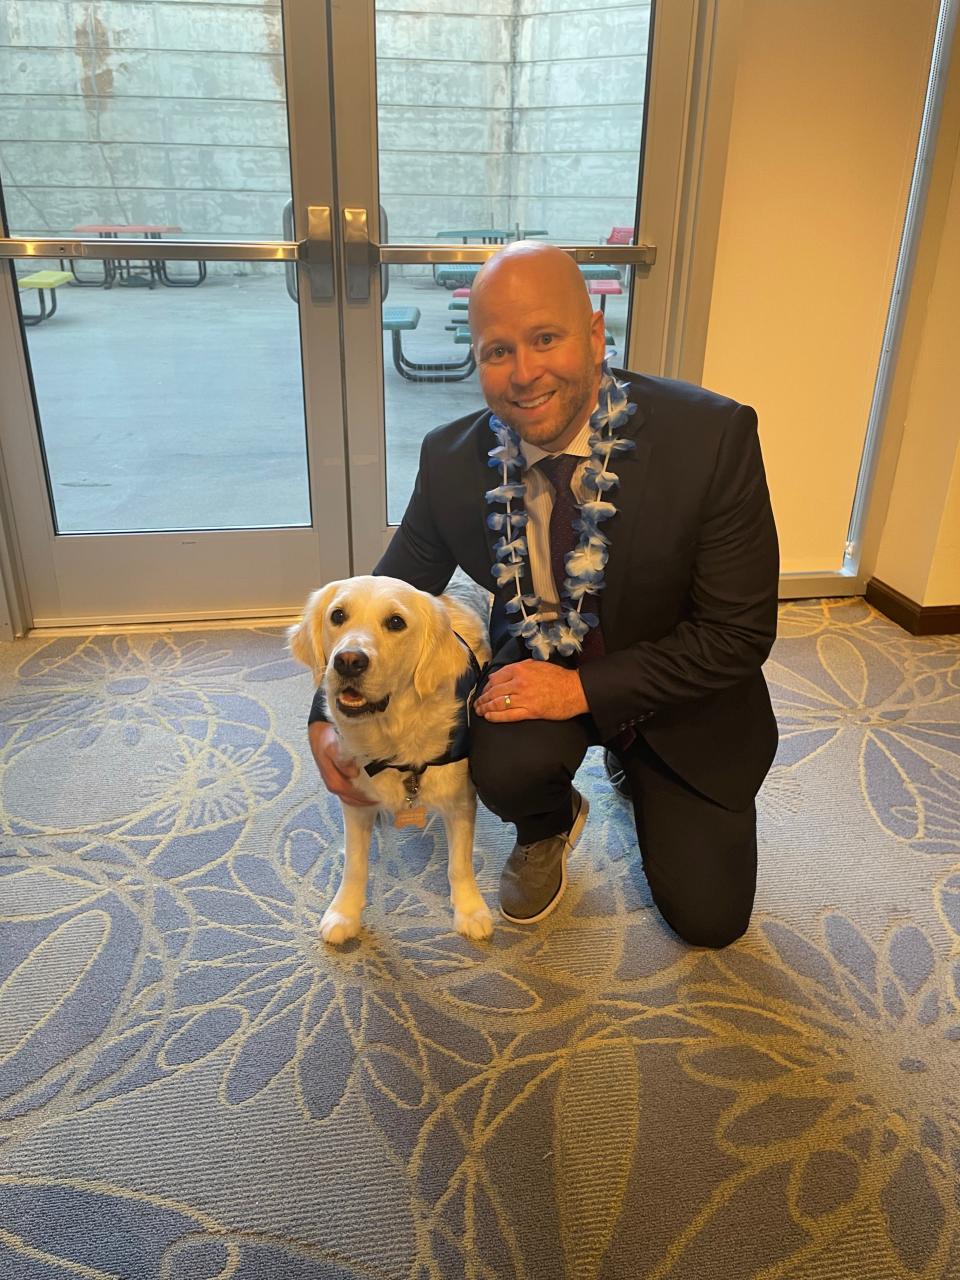 Here with Dr. Matthew B. McDonald III, Children's Specialized Hospital president and CEO, Maui, is the newest staff member and ready to get to work. With "big paws to fill," the 22-month-old English Cream Golden Retriever is the facility's new therapy dog and will continue the work of Burton, who passed in June after an illness.